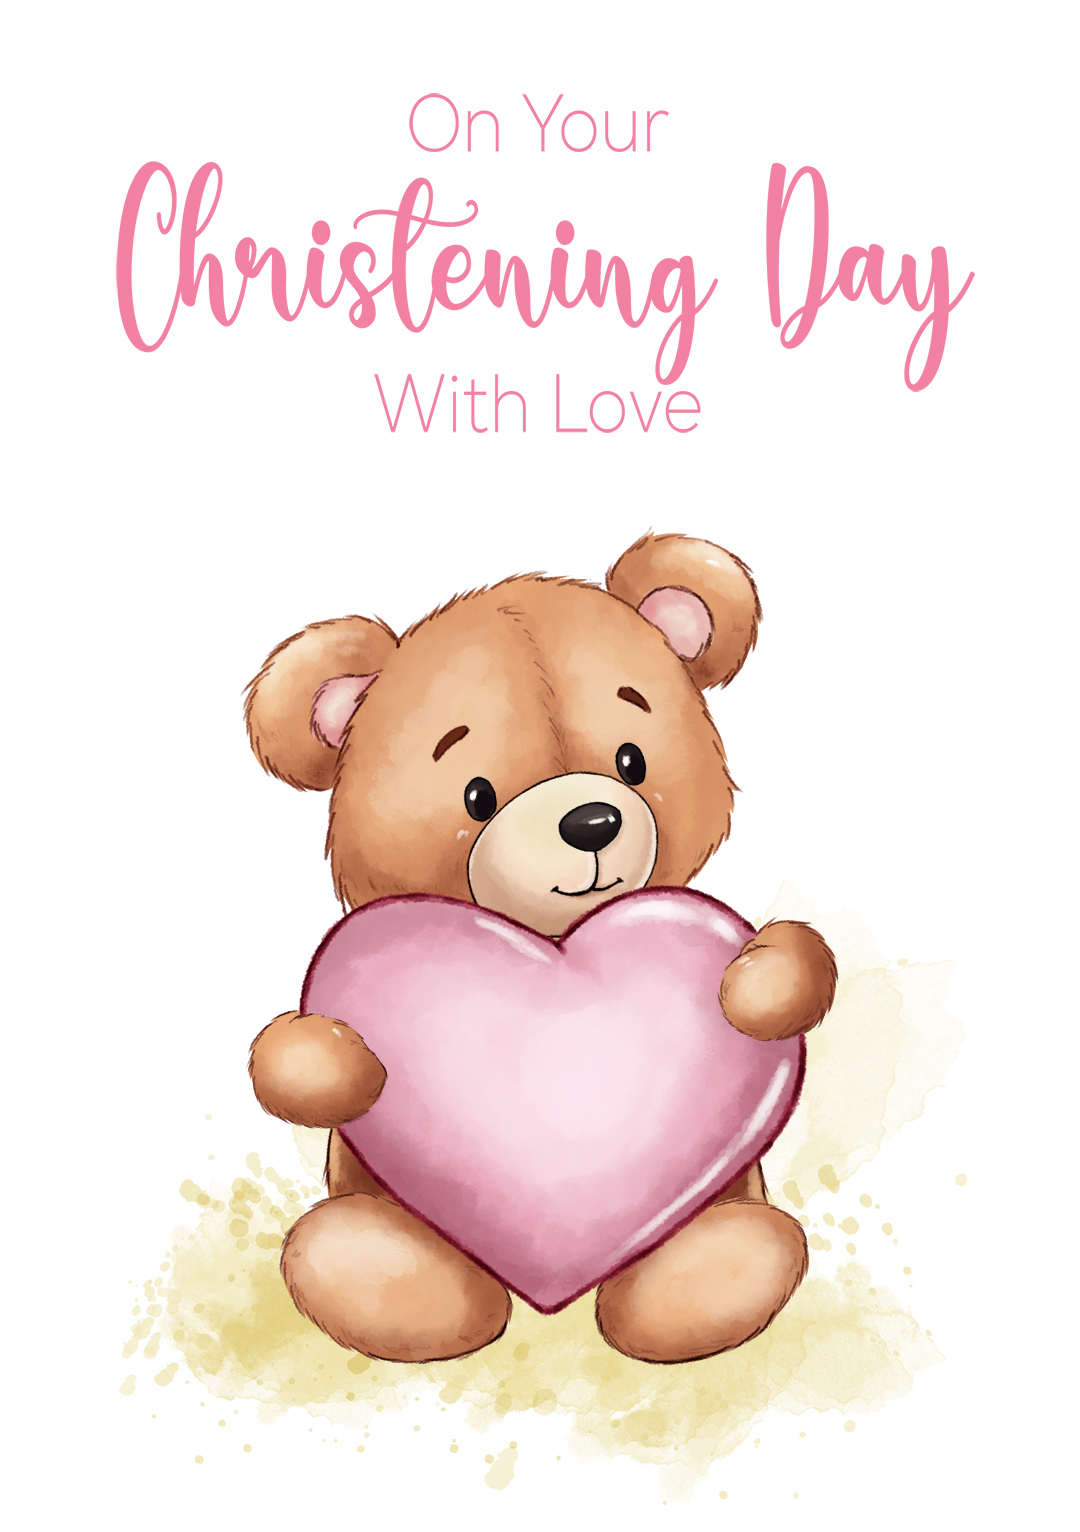 On Your Christening Day With Love - Pink